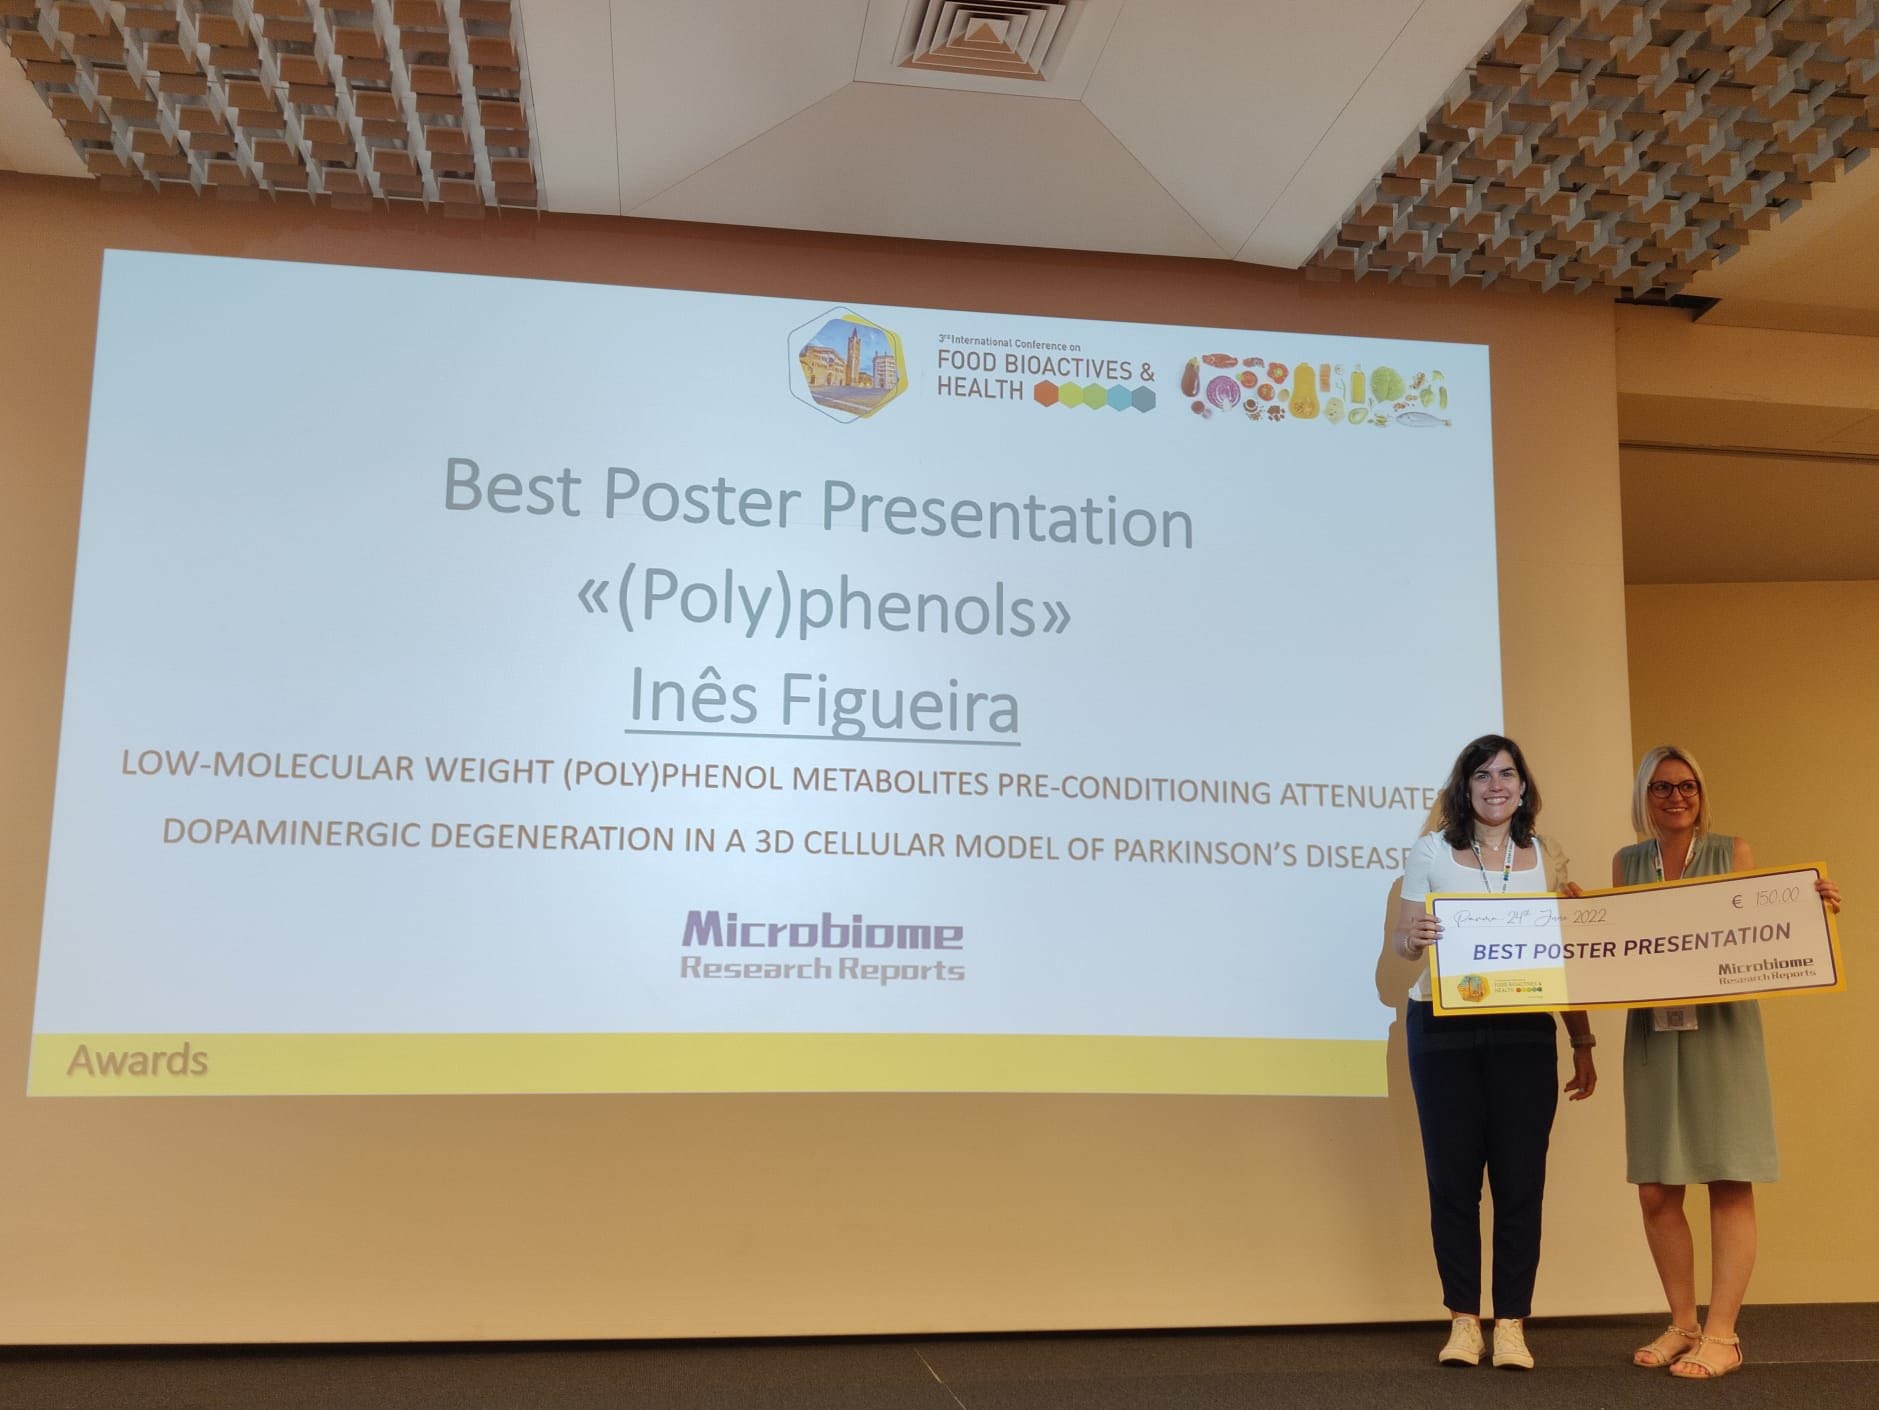 best poster ines figueira - Cópia